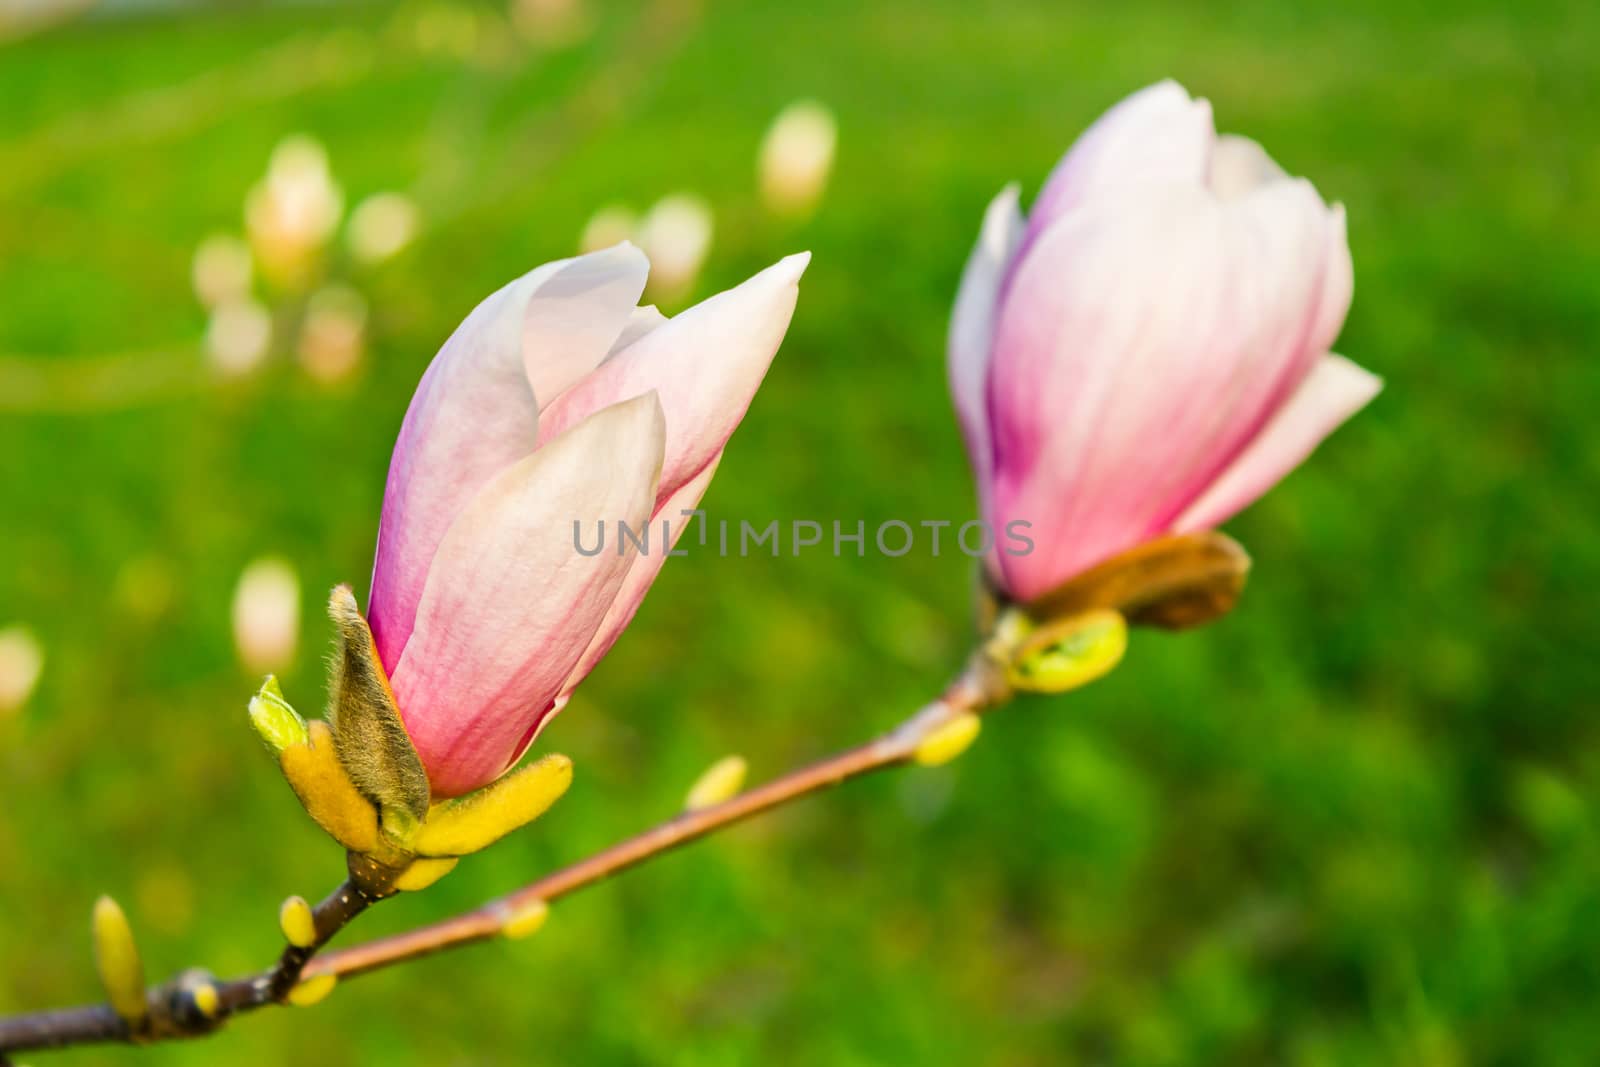 magnolia flowers close up on a green grass background by Pellinni